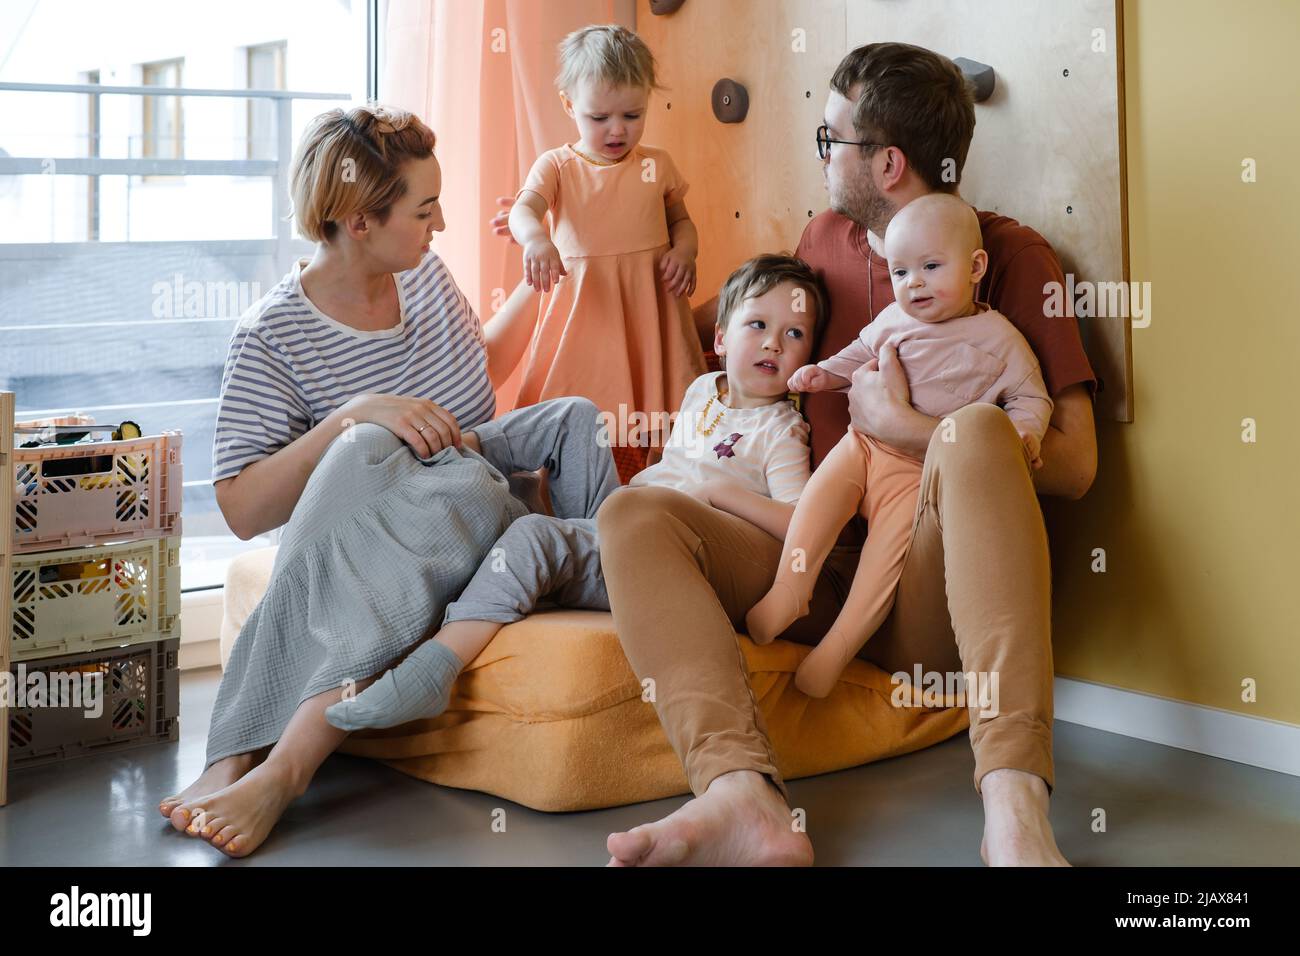 Big family in sunny play room. Parents playing with kids and toys. Happy time together with games. Mother father son daughters at modern colorful home Stock Photo